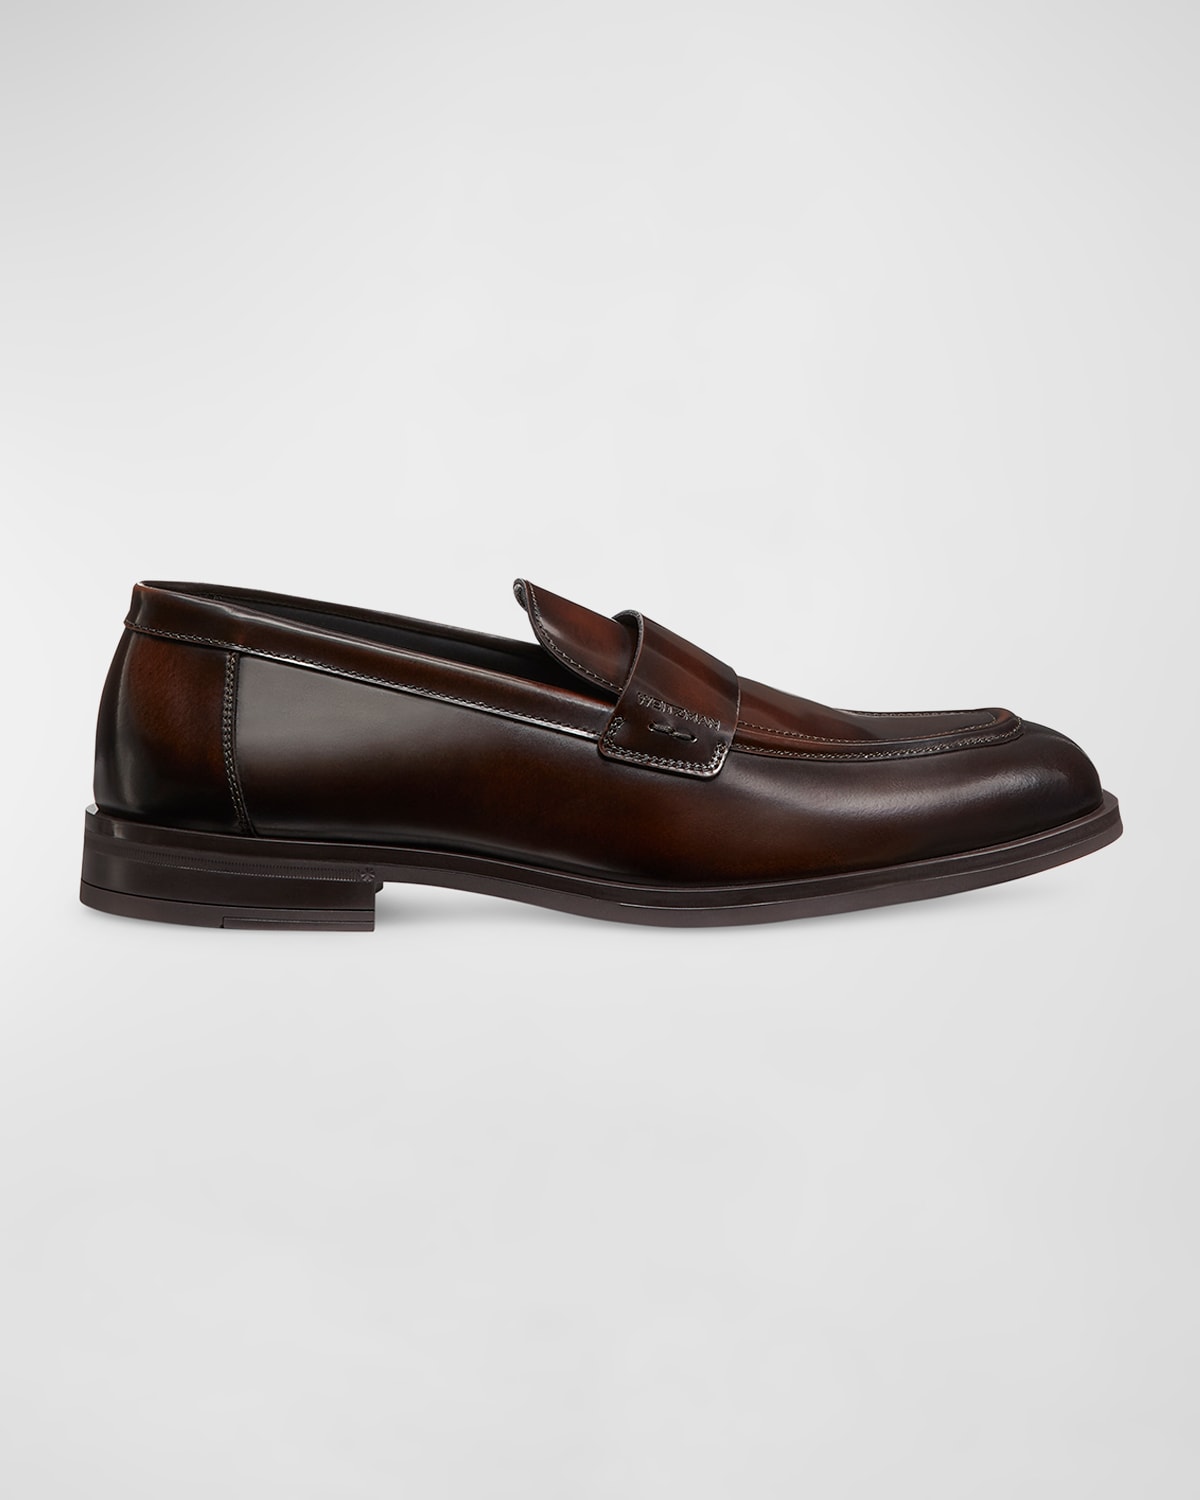 Men's Club Brushed Leather Slip-On Loafers